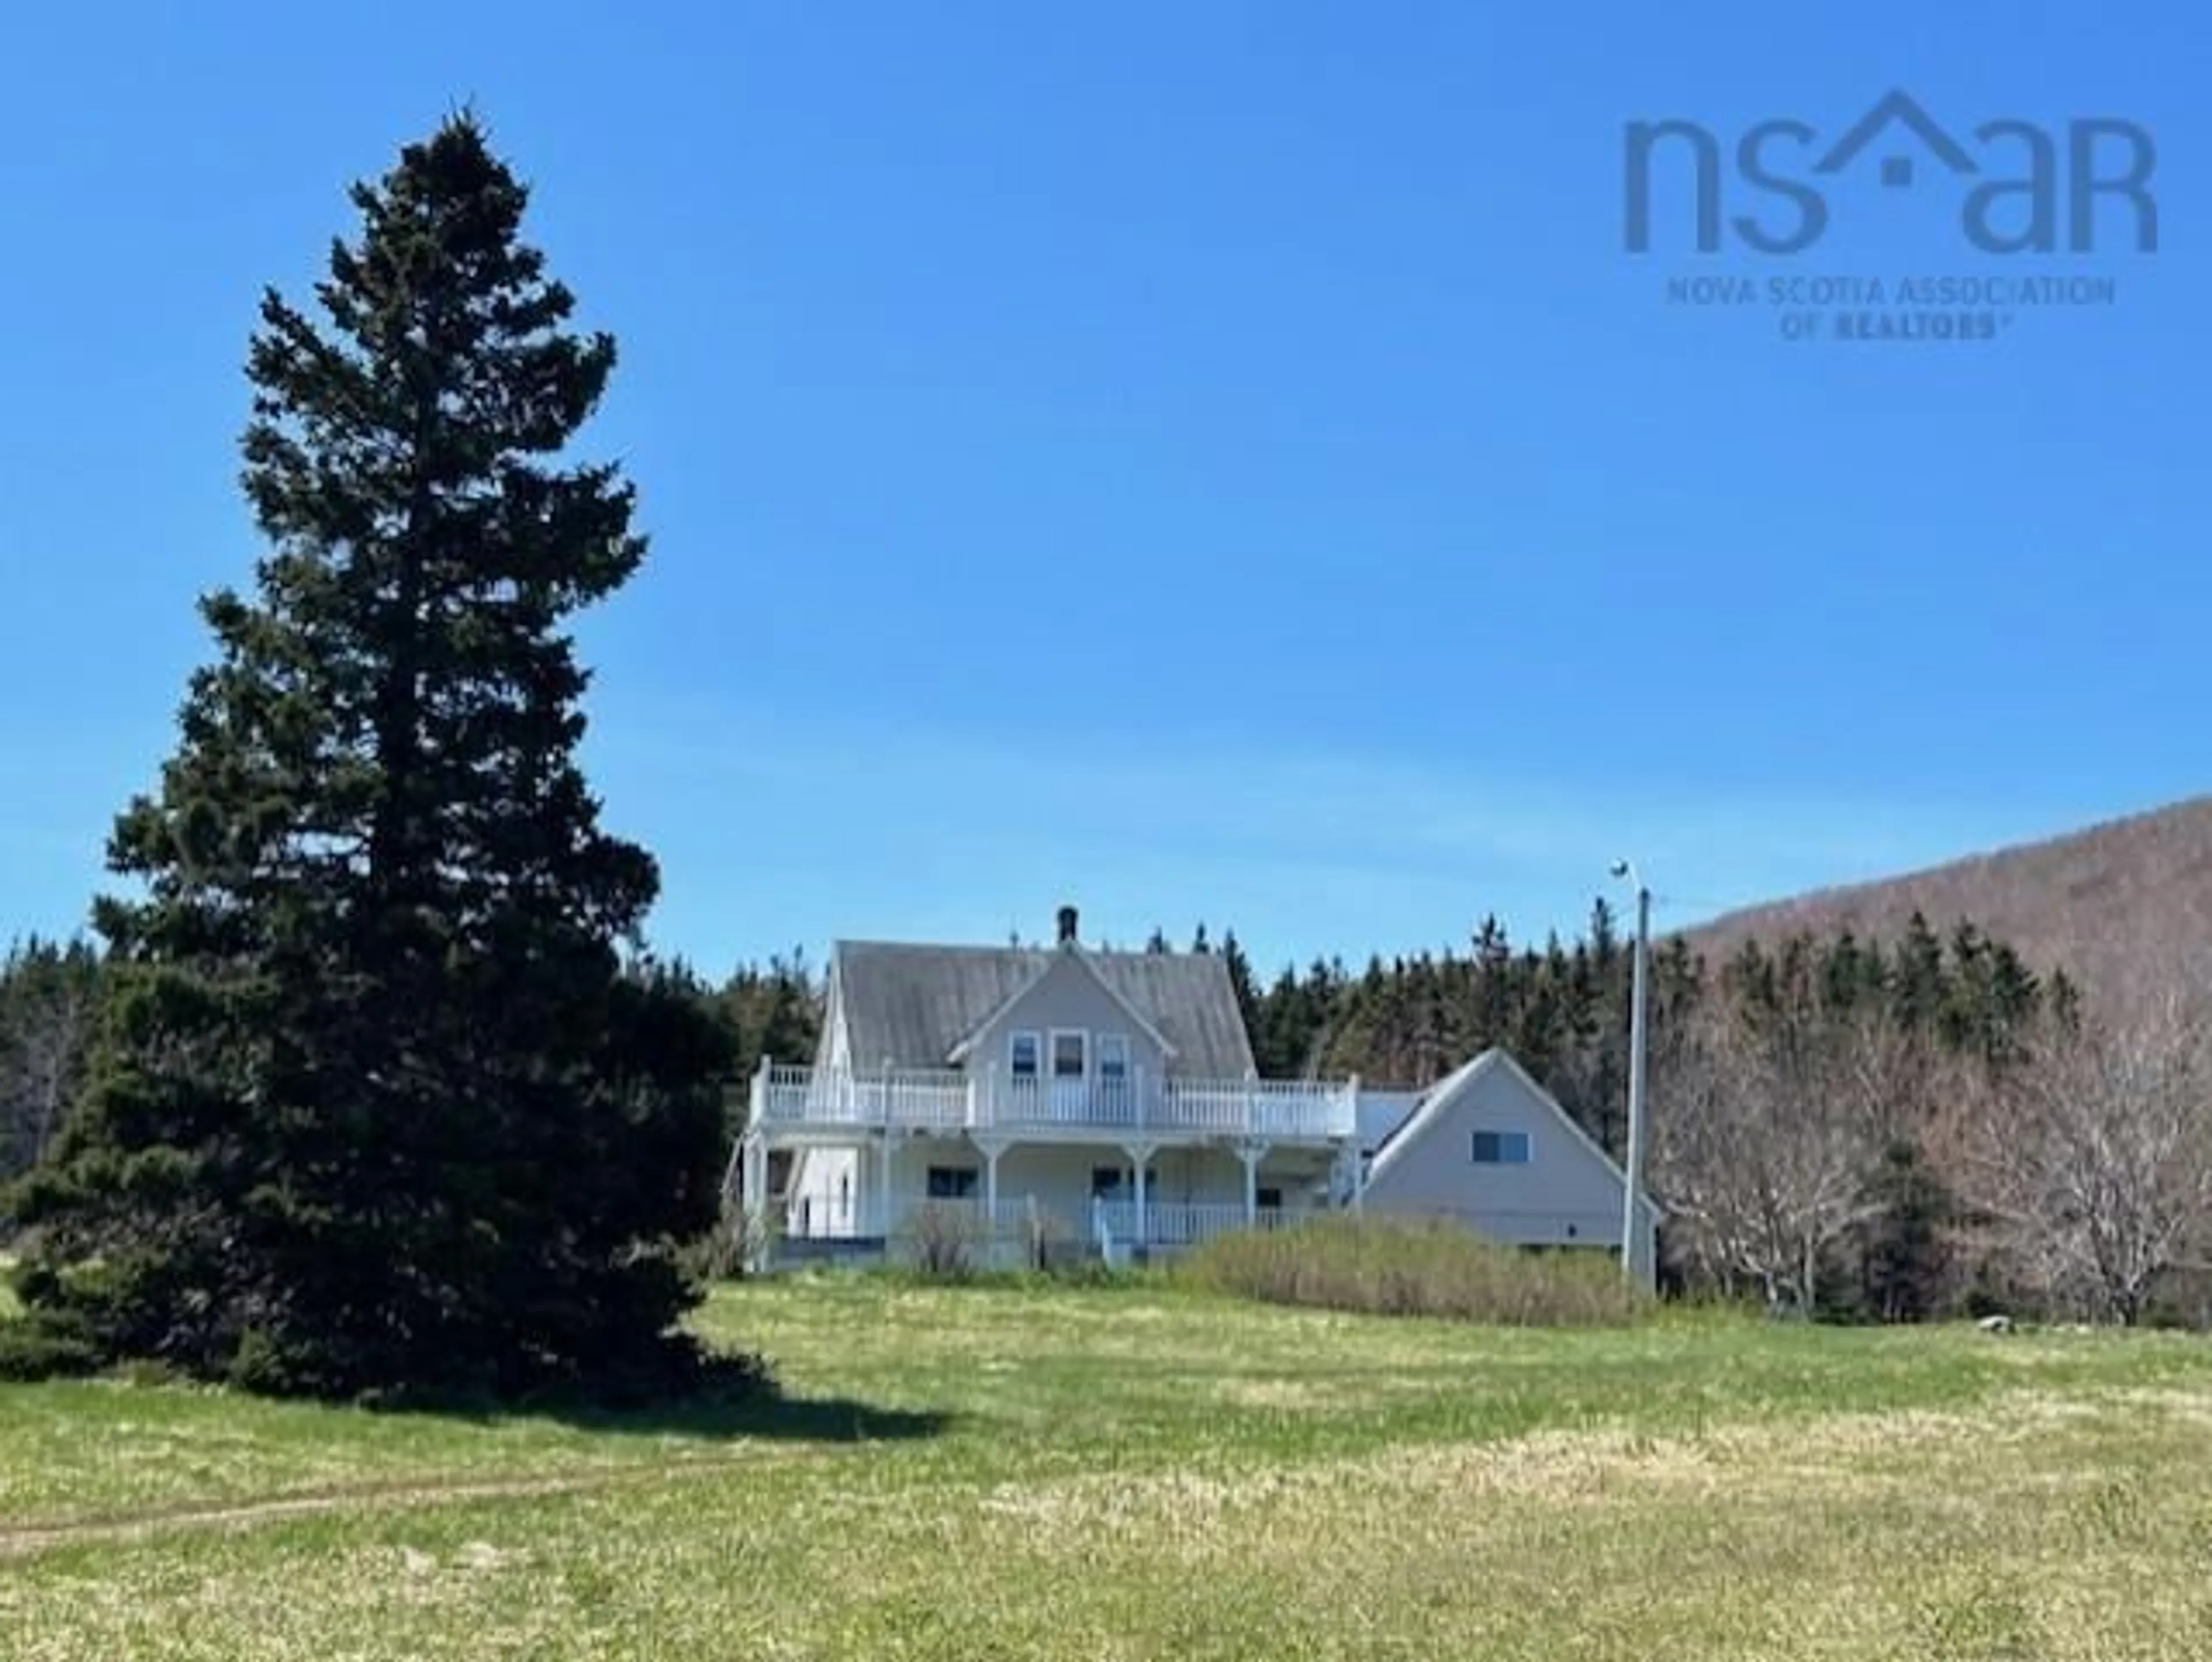 Frontside or backside of a home for 2531 Bay St. Lawrence Rd, Valley Nova Scotia B0C 1G0